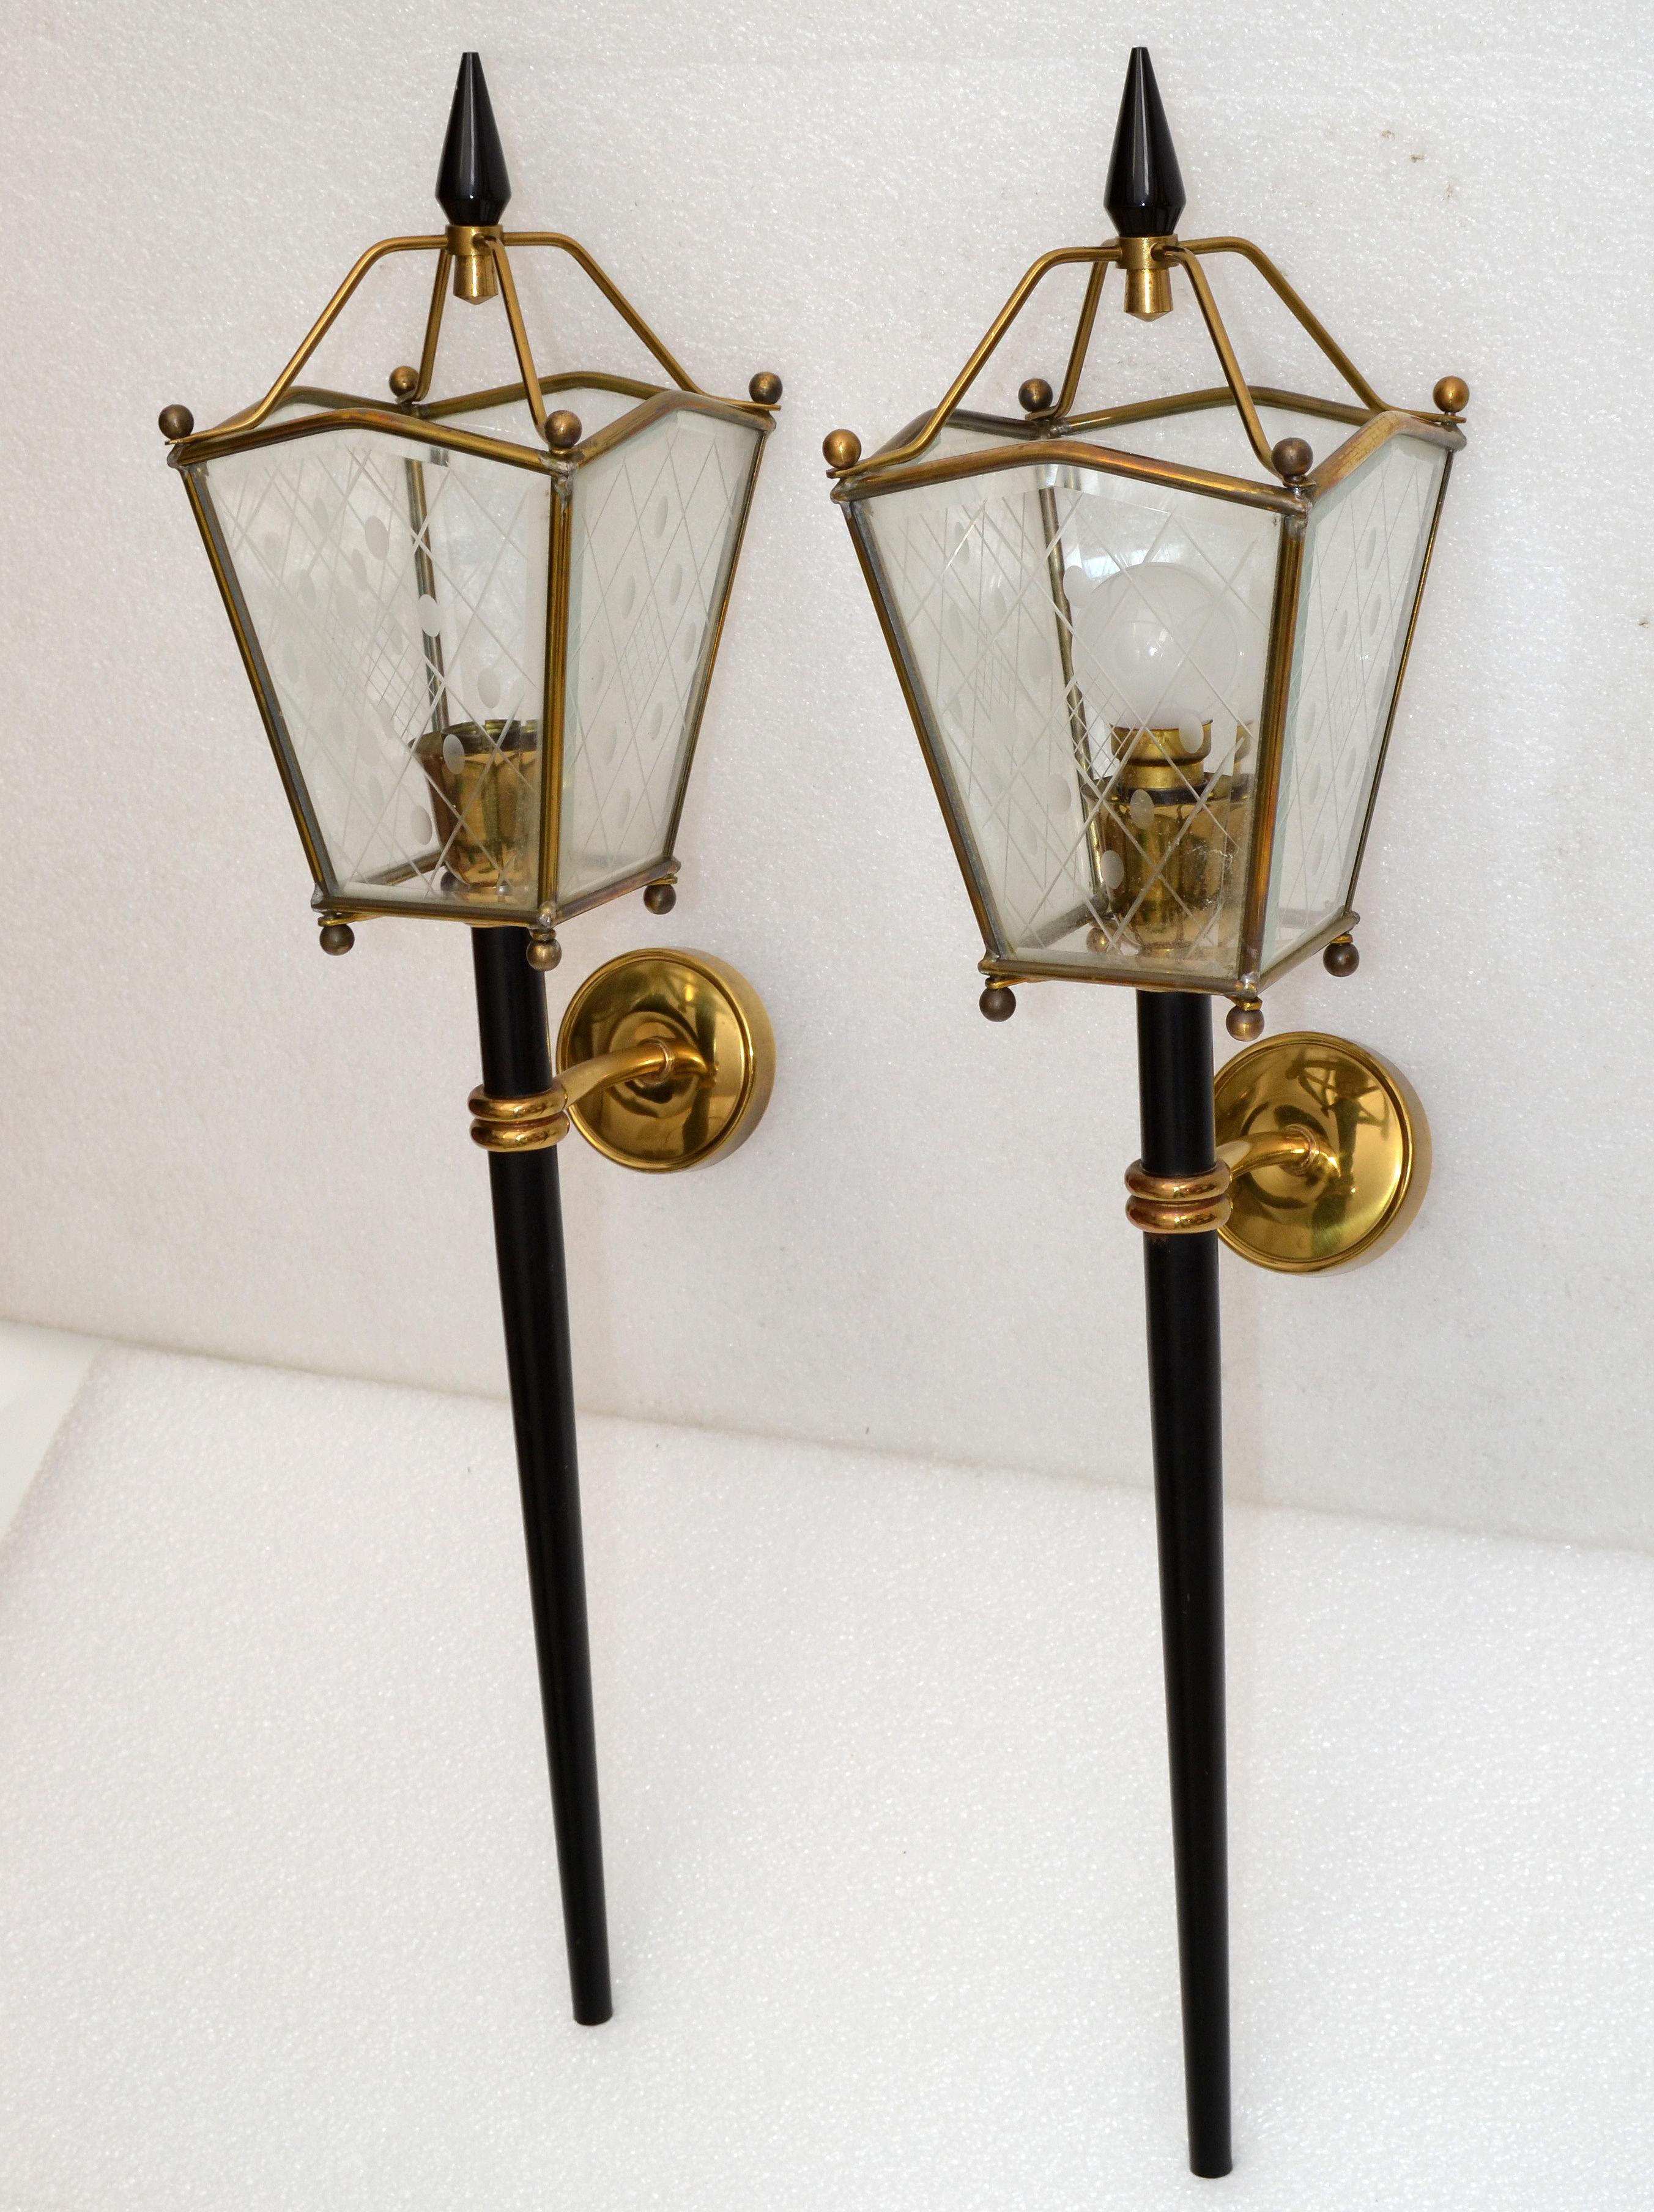 Jacques Adnet Style Sconces Lantern Wall Lamps French Mid-Century Modern, Pair 8